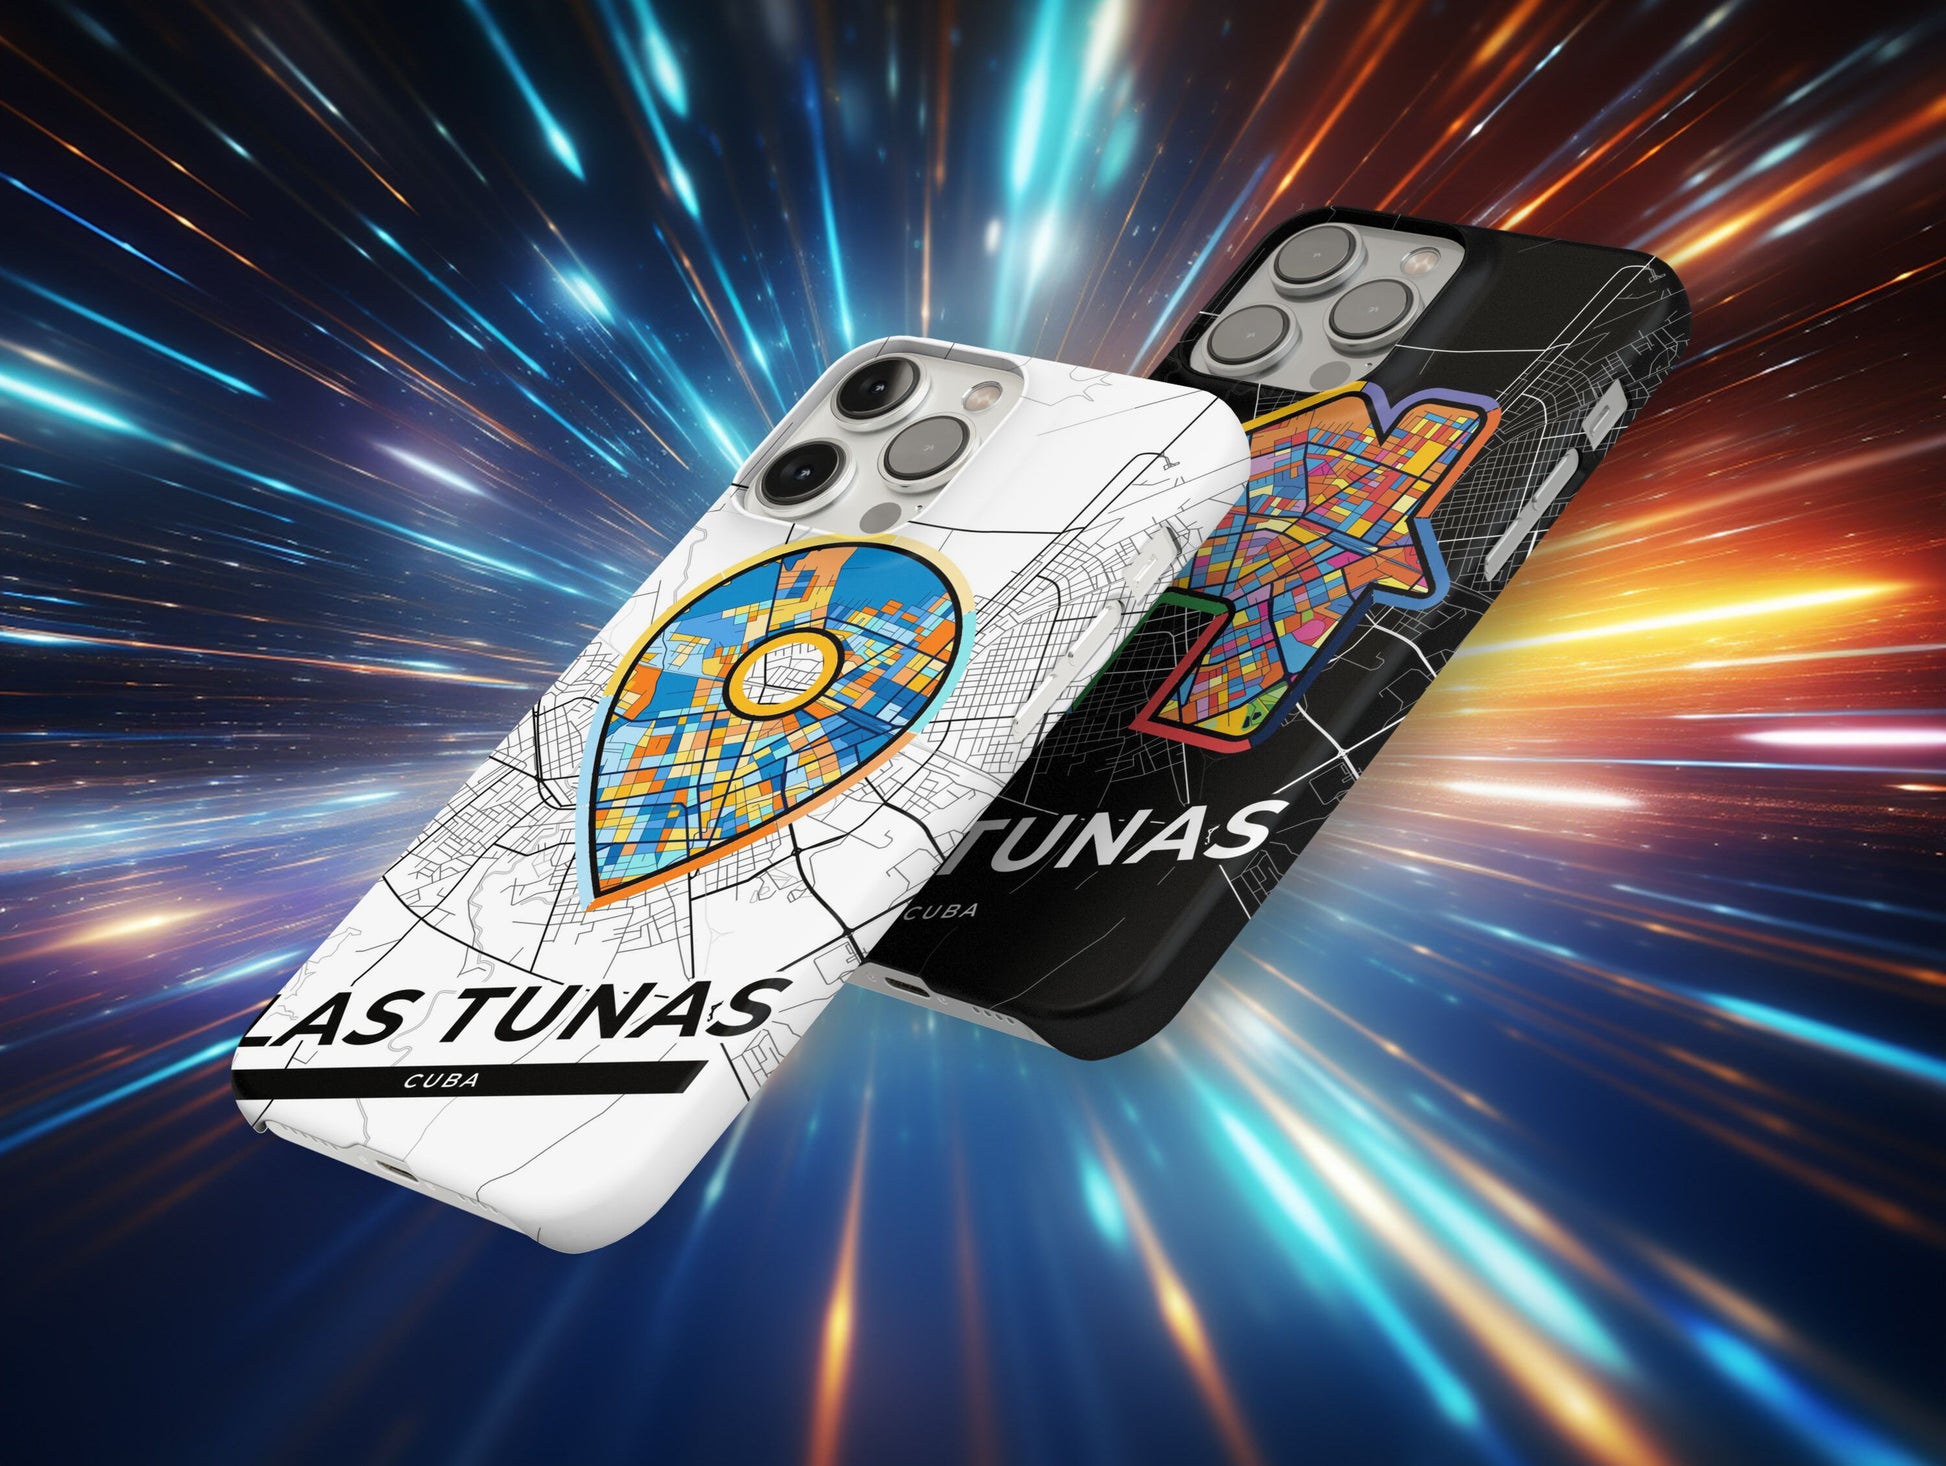 Las Tunas Cuba slim phone case with colorful icon. Birthday, wedding or housewarming gift. Couple match cases.